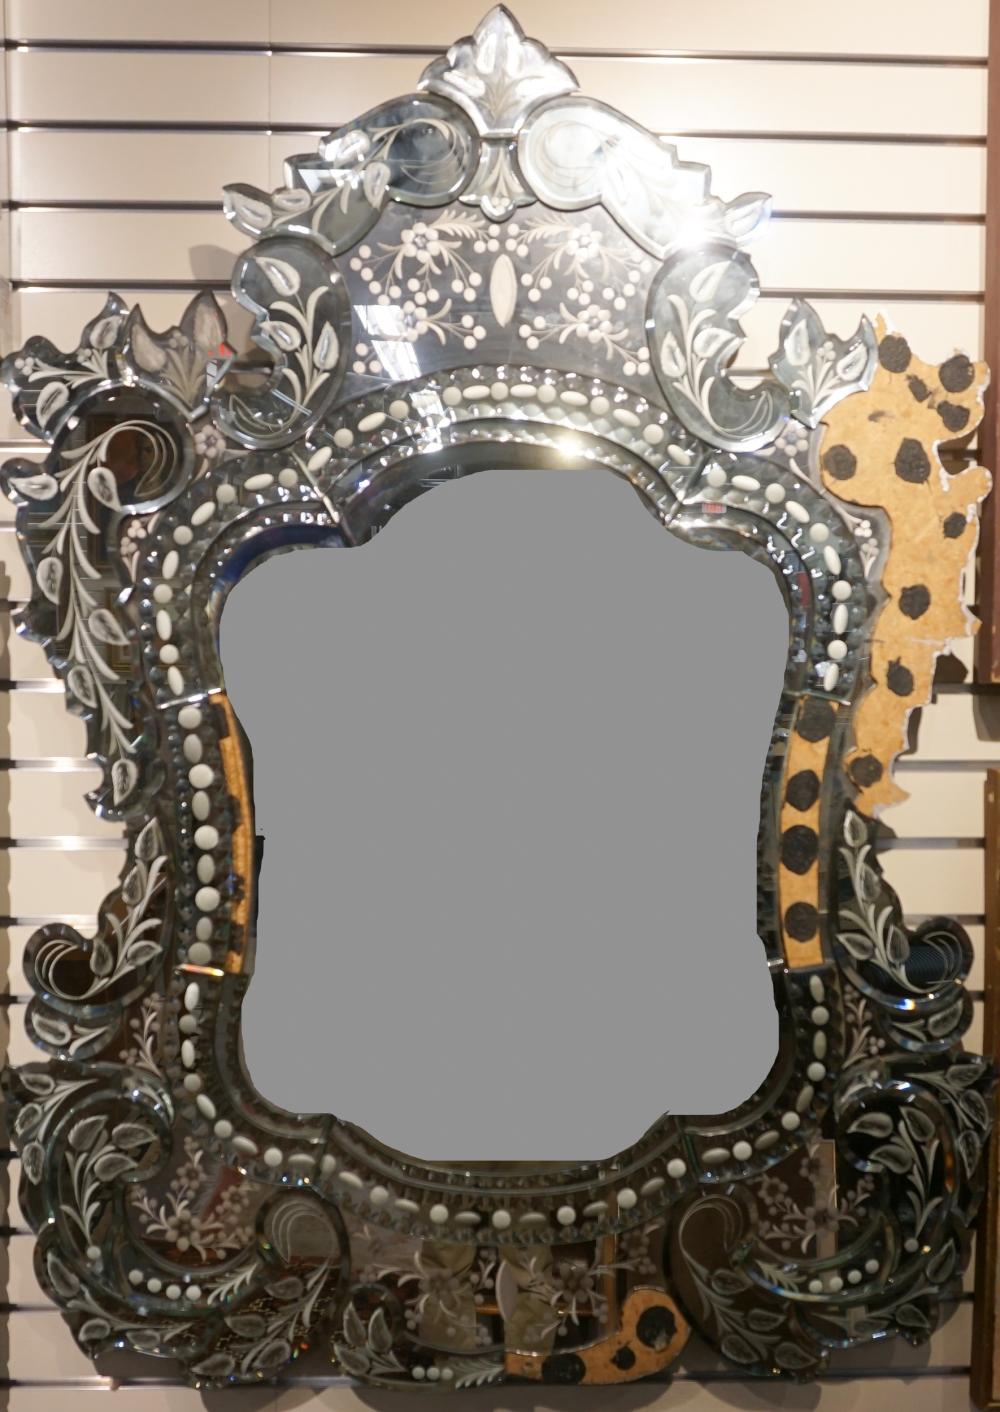 VENETIAN ETCHED GLASS FRAME MIRROR  32adc6